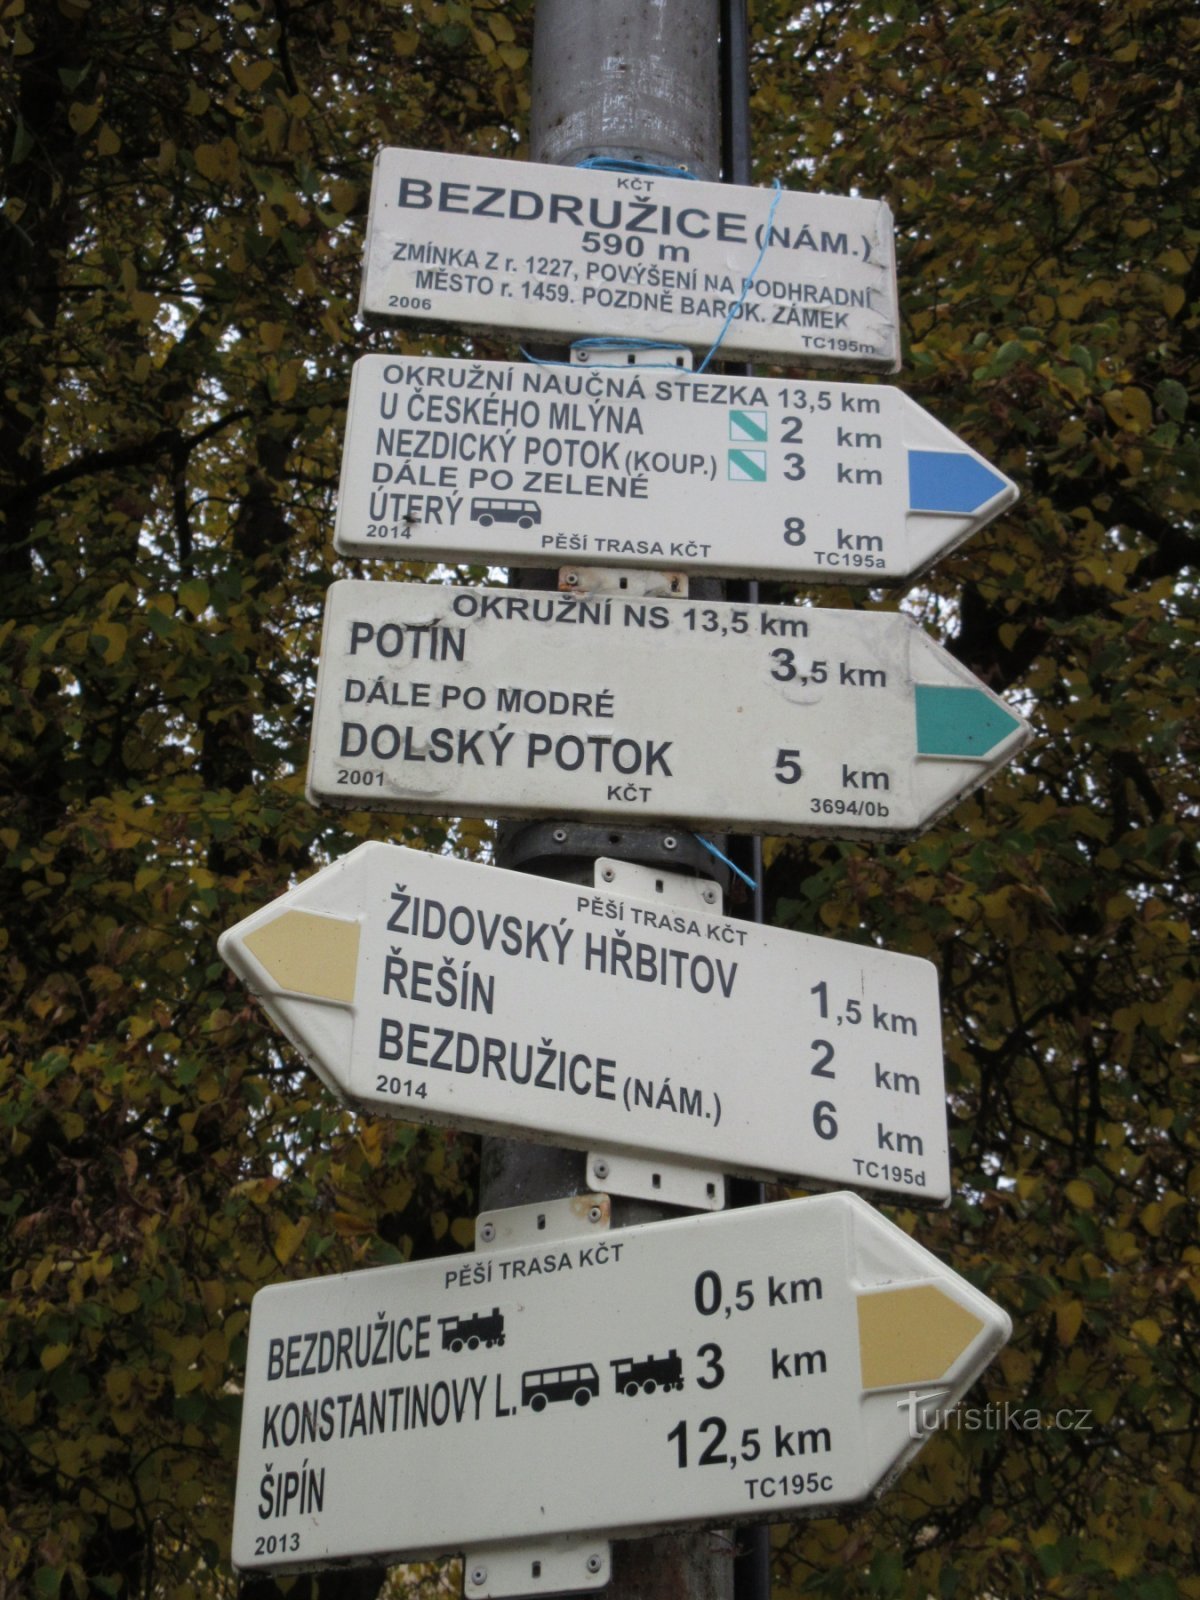 Signpost on the square